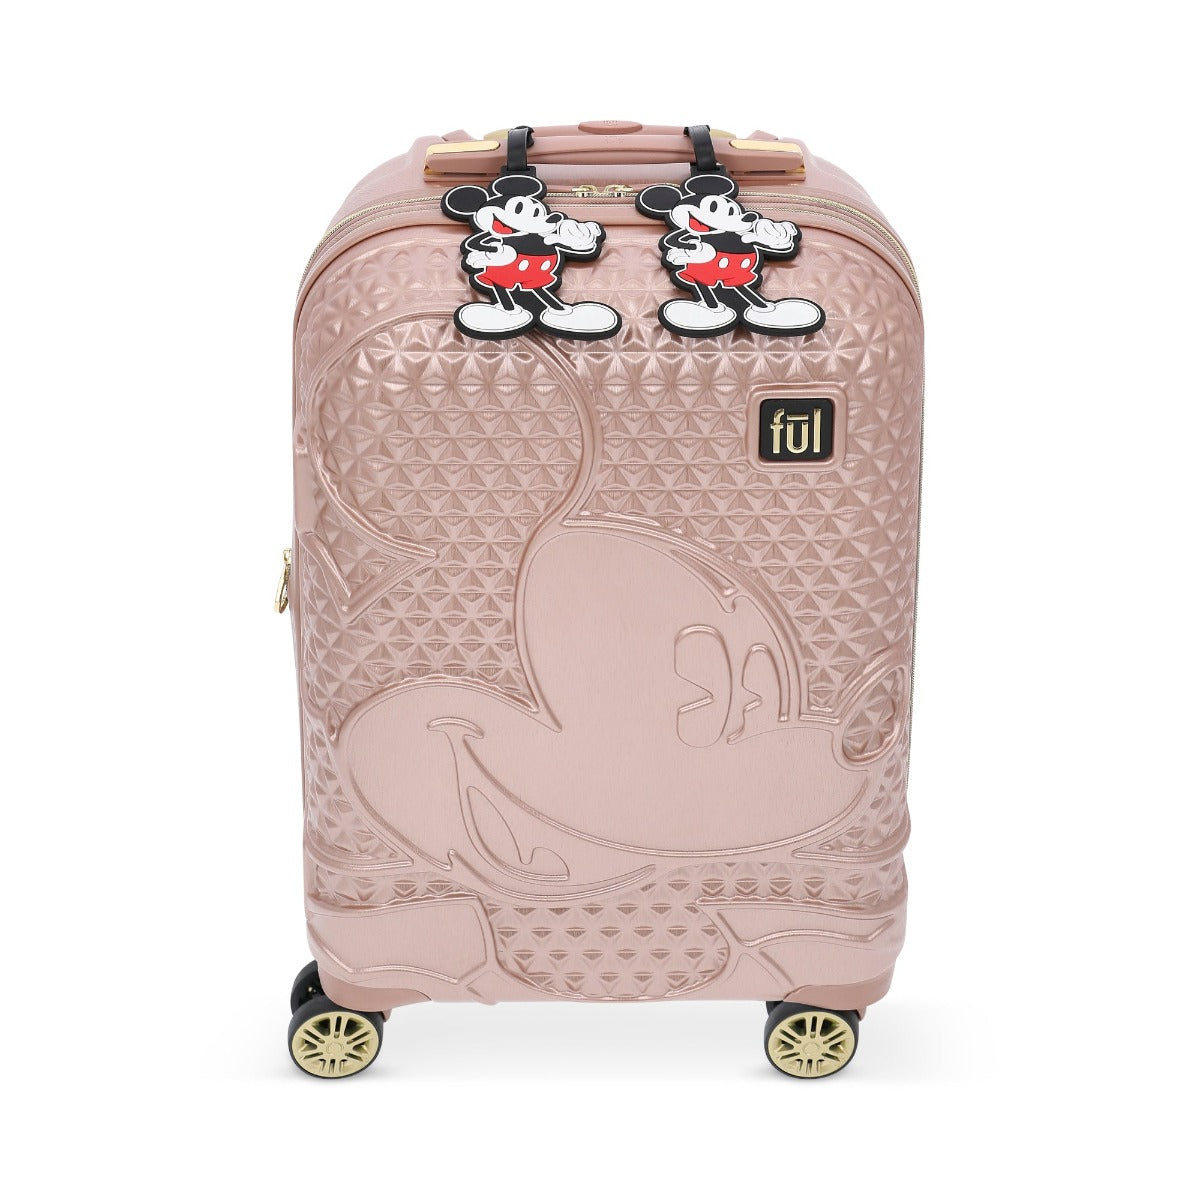 Rose gold Ful Disney Mickey Mouse 22.5" carry-on hardside spinner suitcase luggage with 2 id tags